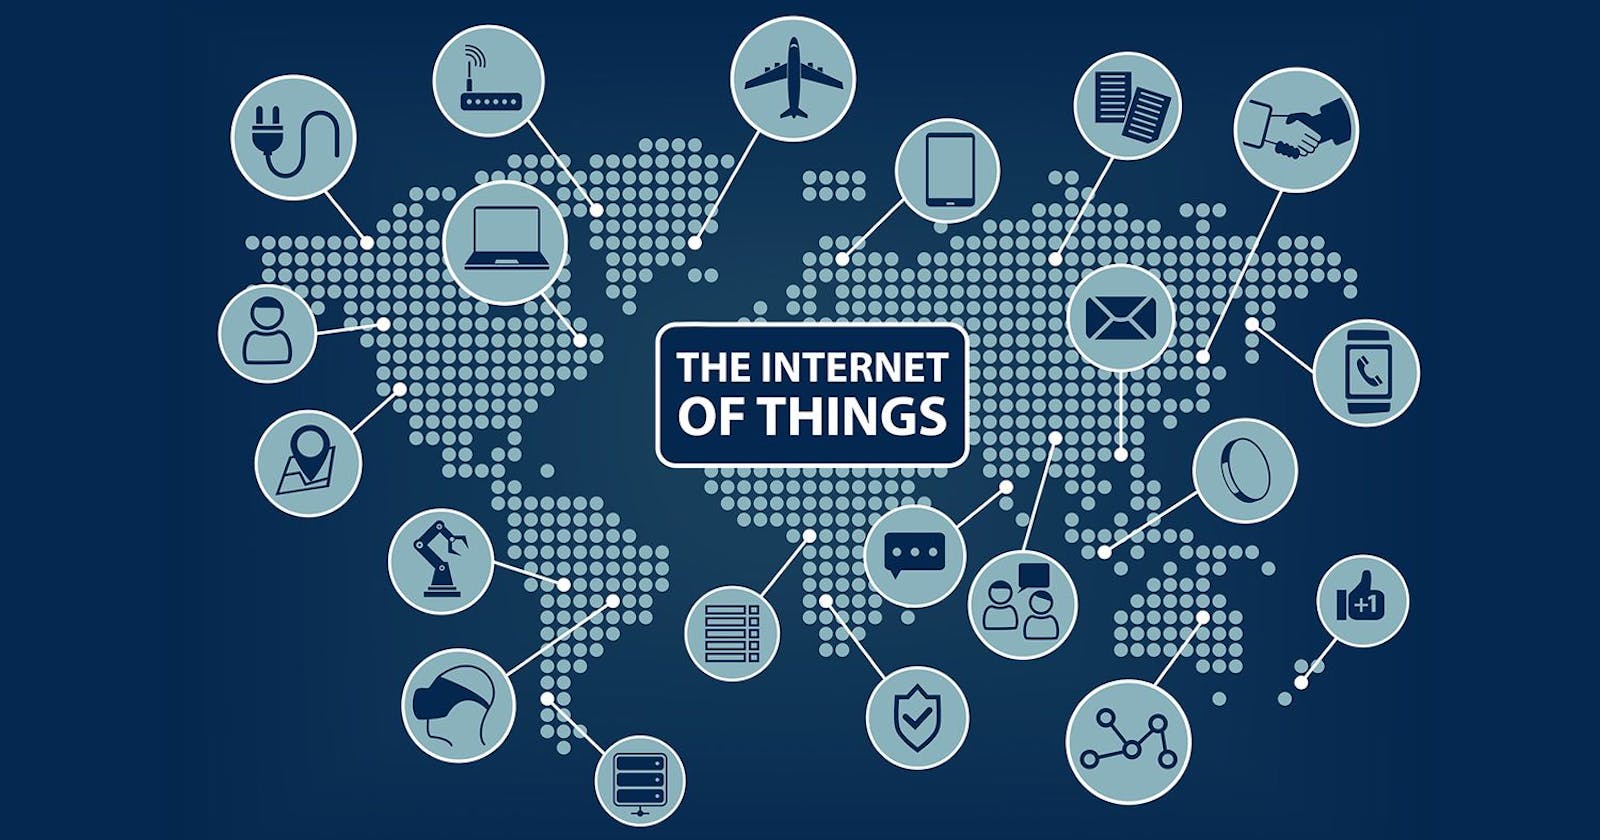 Everything You Need to Know About the Internet of Things (Part 2)